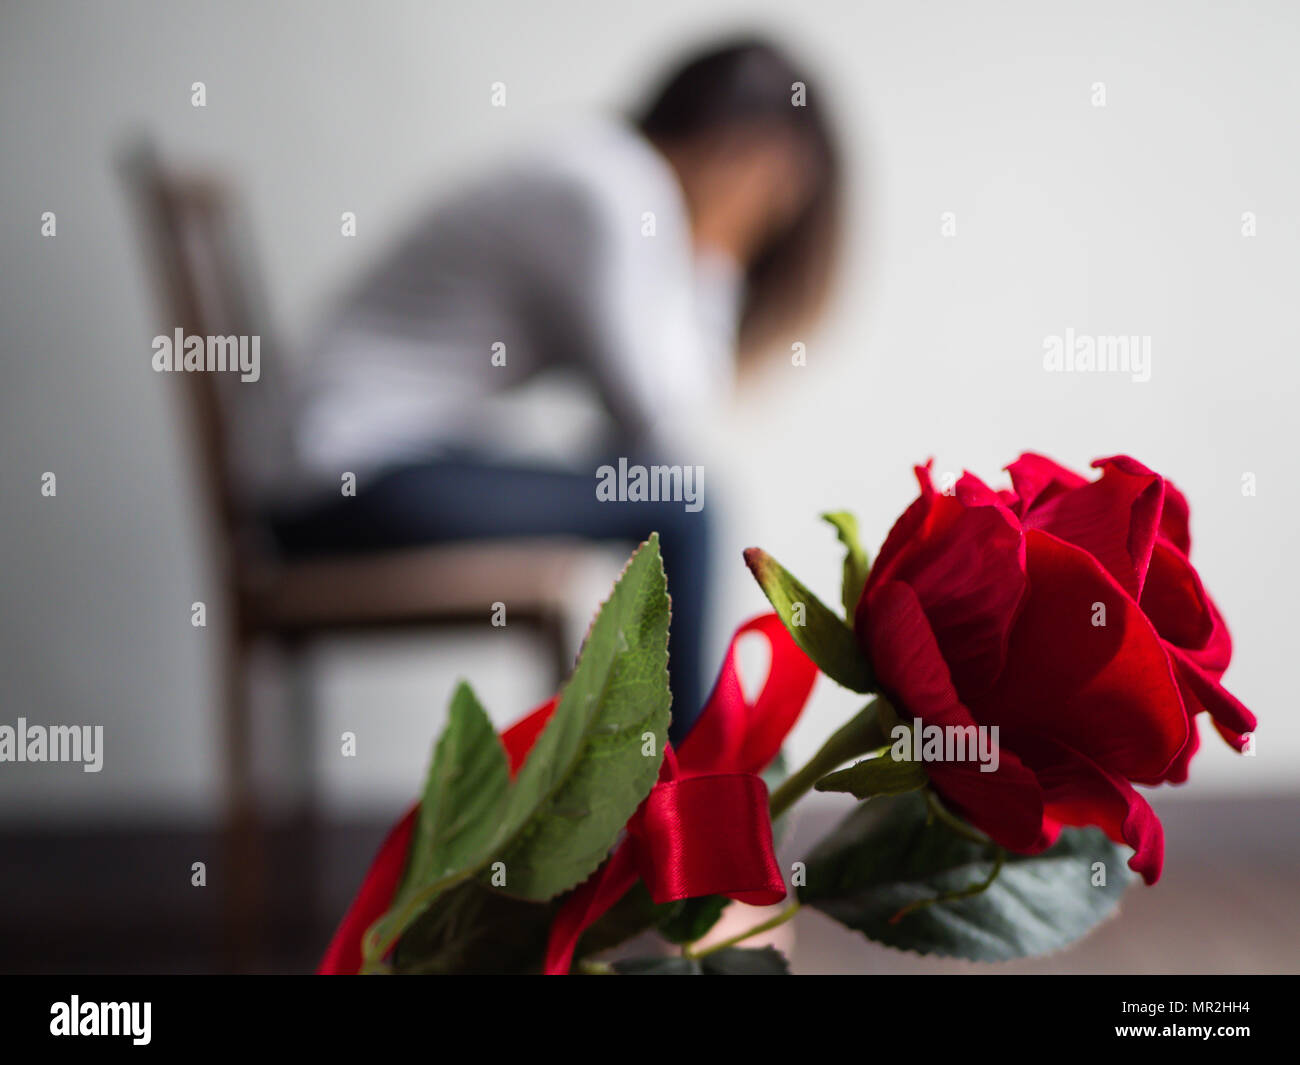 Sad woman sitting and crying with red rose in focus. Lonly , love ...